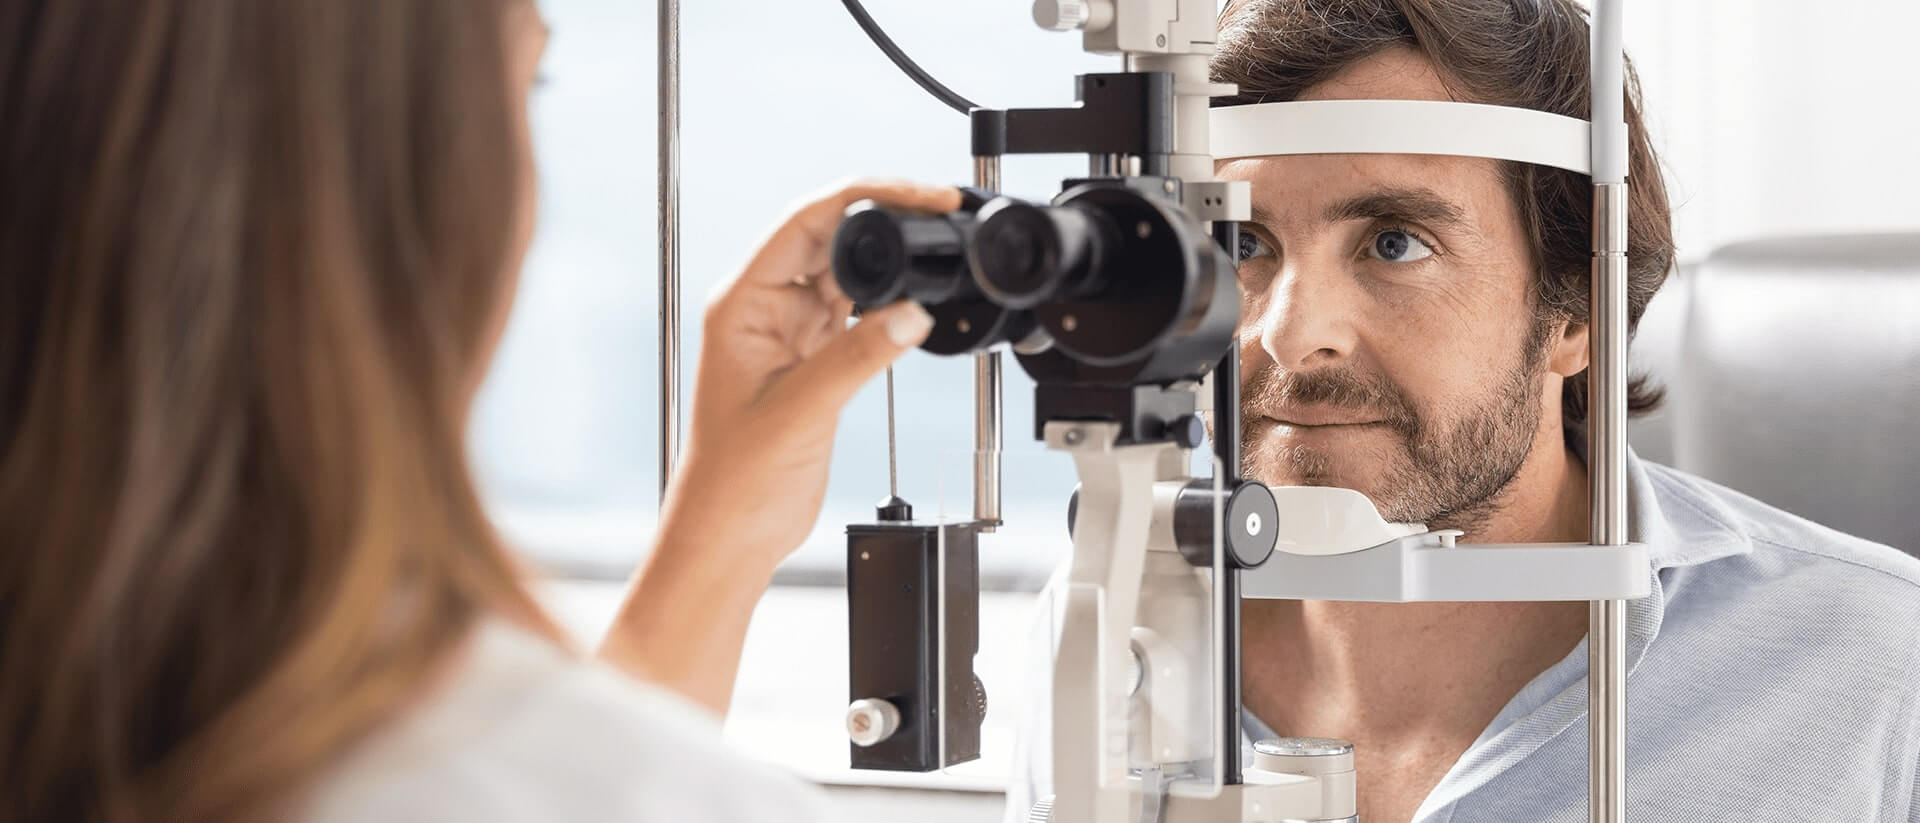 doctor to carry out an ophthalmology examination on a patient